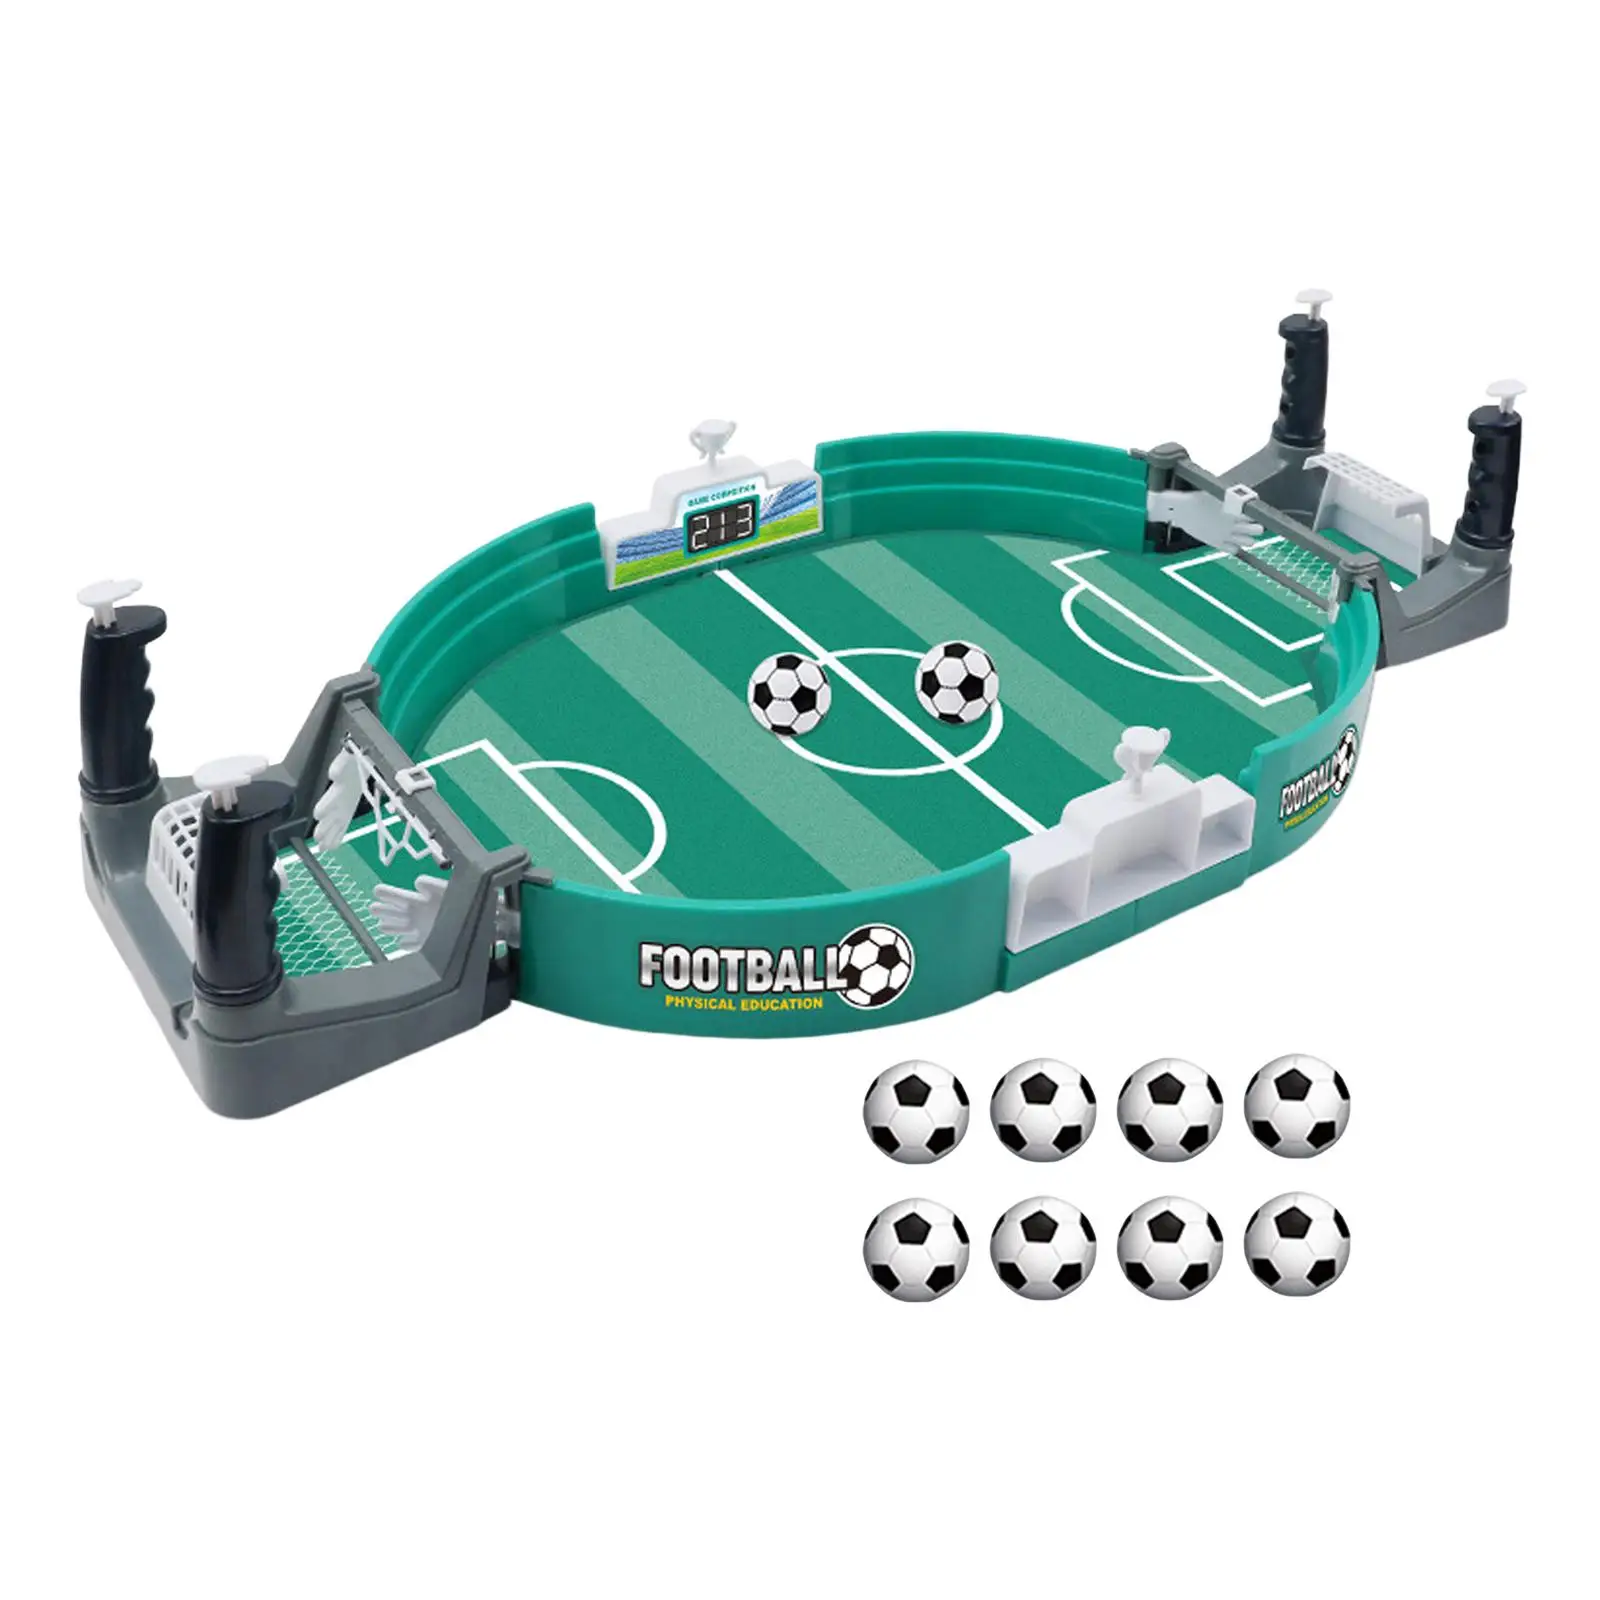 Table Soccer game Board Game Hand Eye Coordination Interactive for Family Game Entertainment Kids Adults Two players